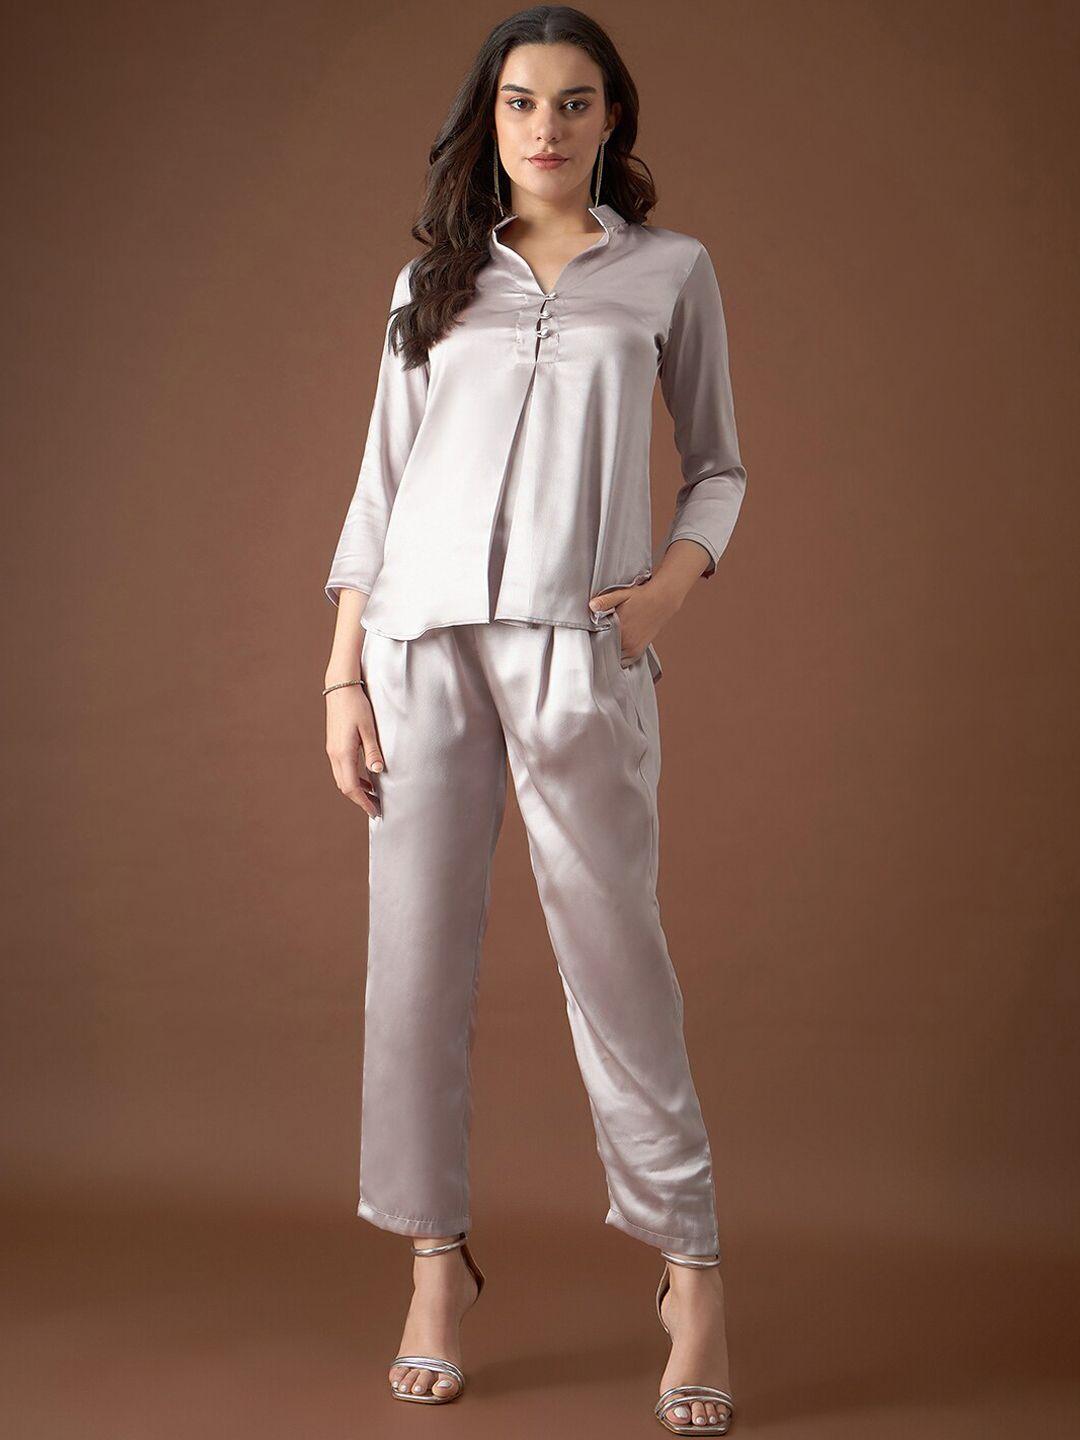 mabish by sonal jain collar shirt with trousers co-ords